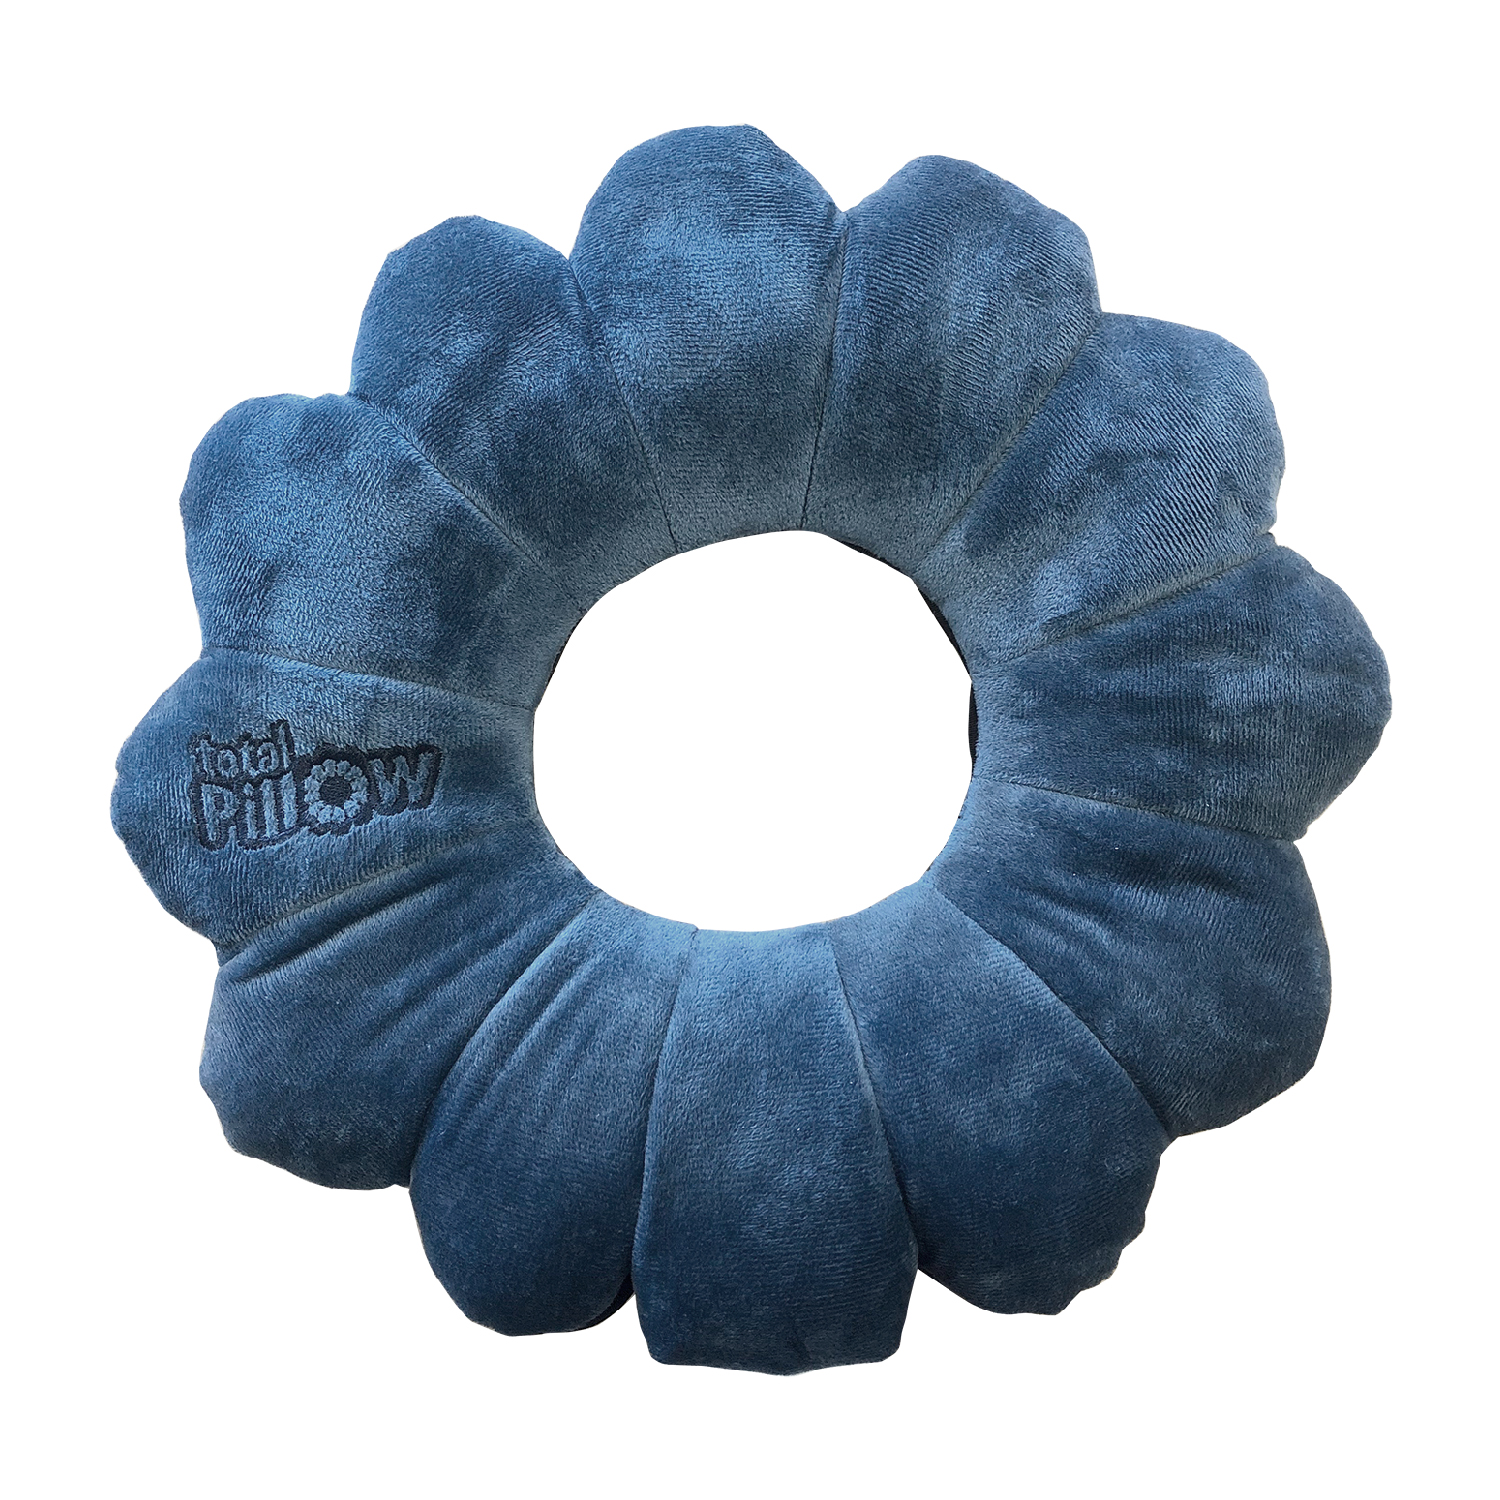 Total Pillow Microbead Adjustable Pillow for Neck and Lumbar Support,  Blue - image 2 of 7